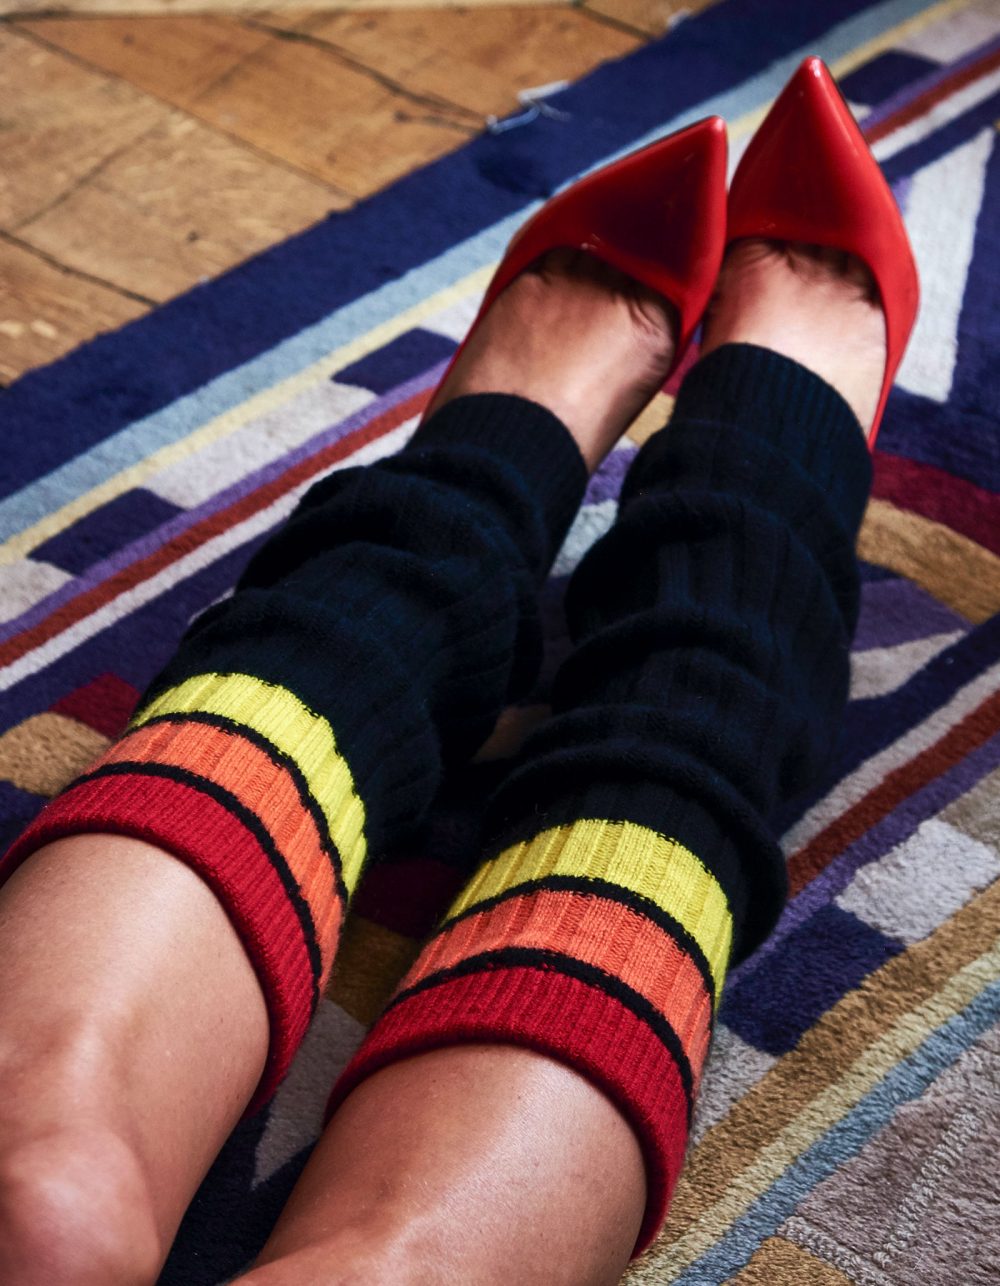 Cashmere legwarmers from the women's designer cashmere collection at malin darlin.